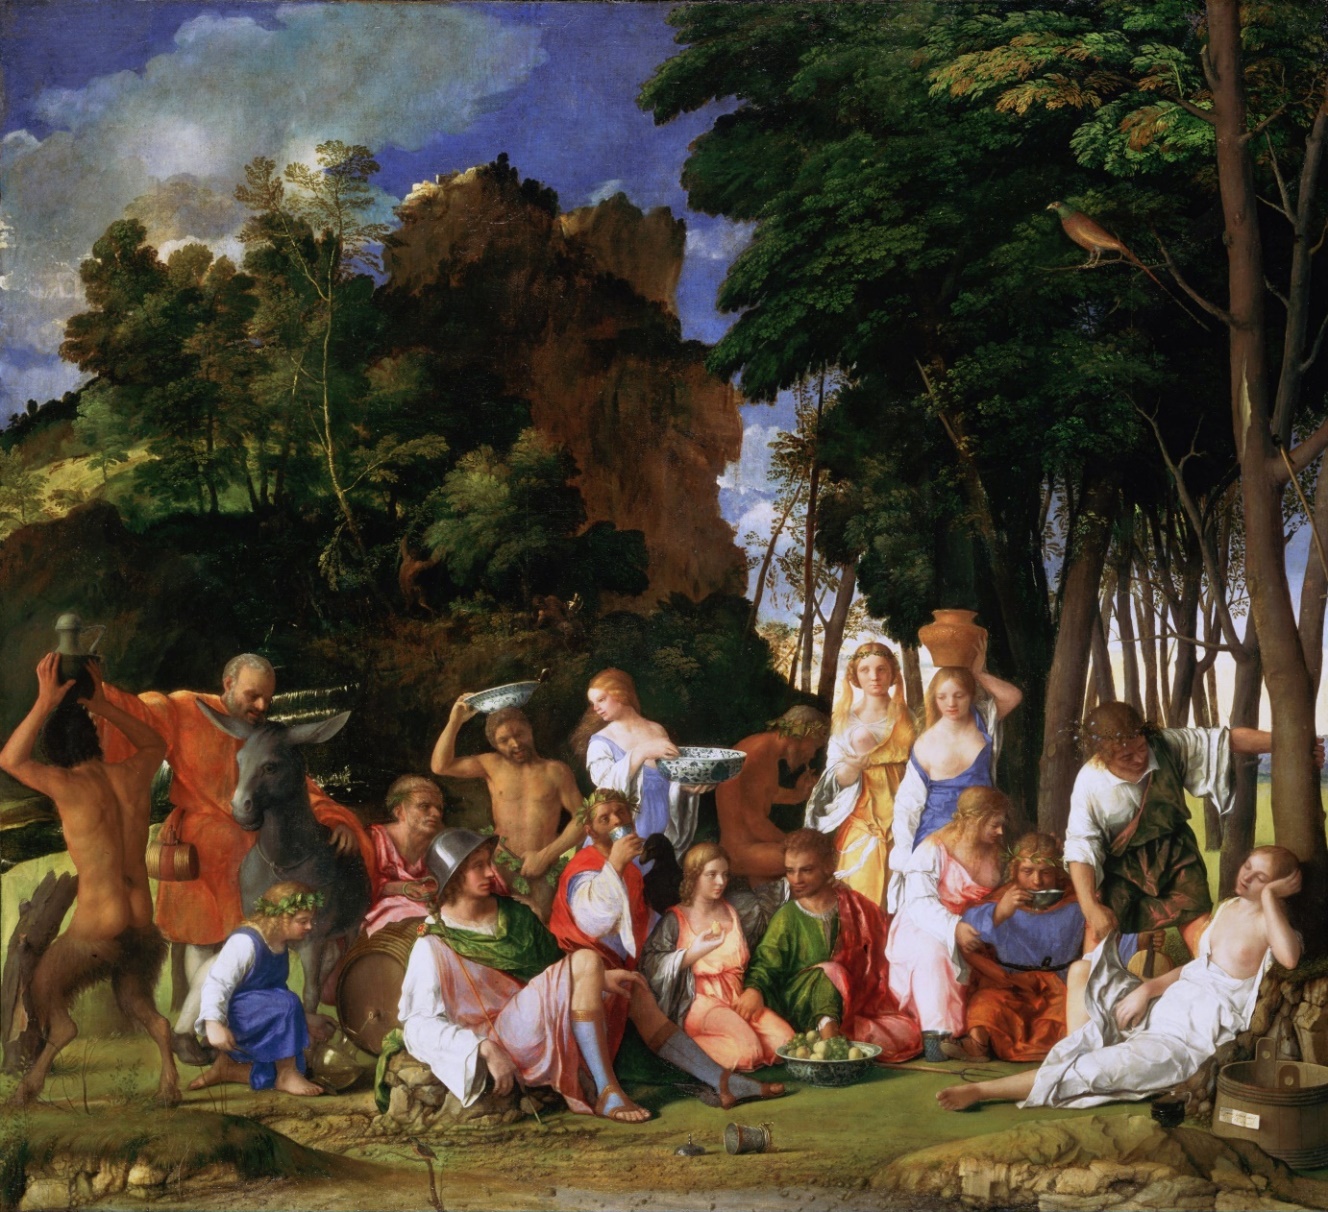 The Feast of the Gods by Giovanni Bellini 